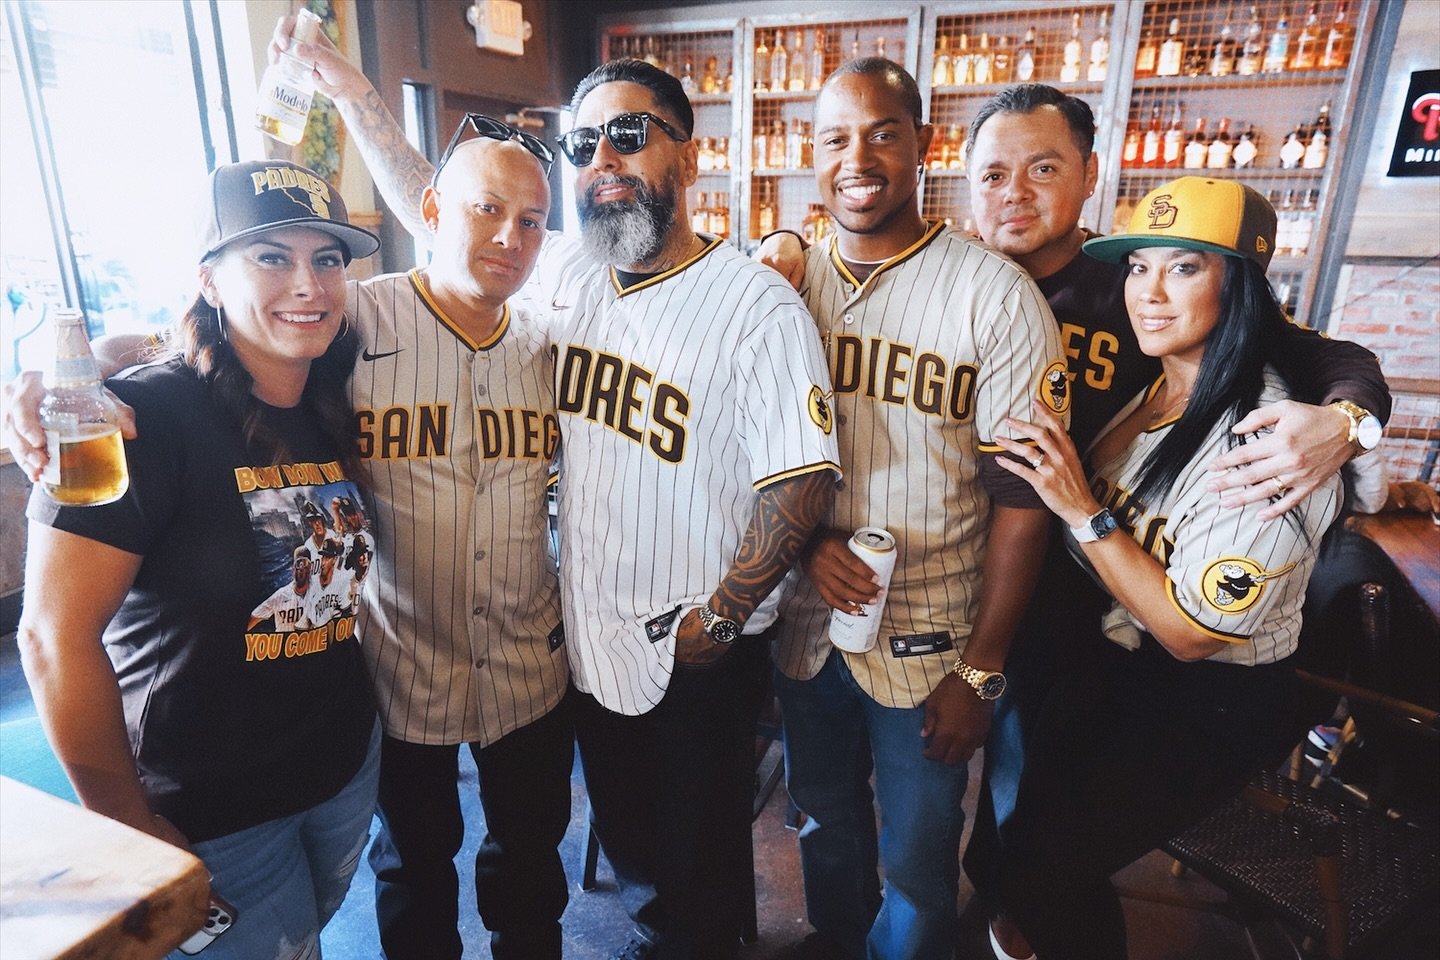 We love Wednesday day games! ⚾️ Grub on some tacos and fuel up with tequila before heading into Petco Park!